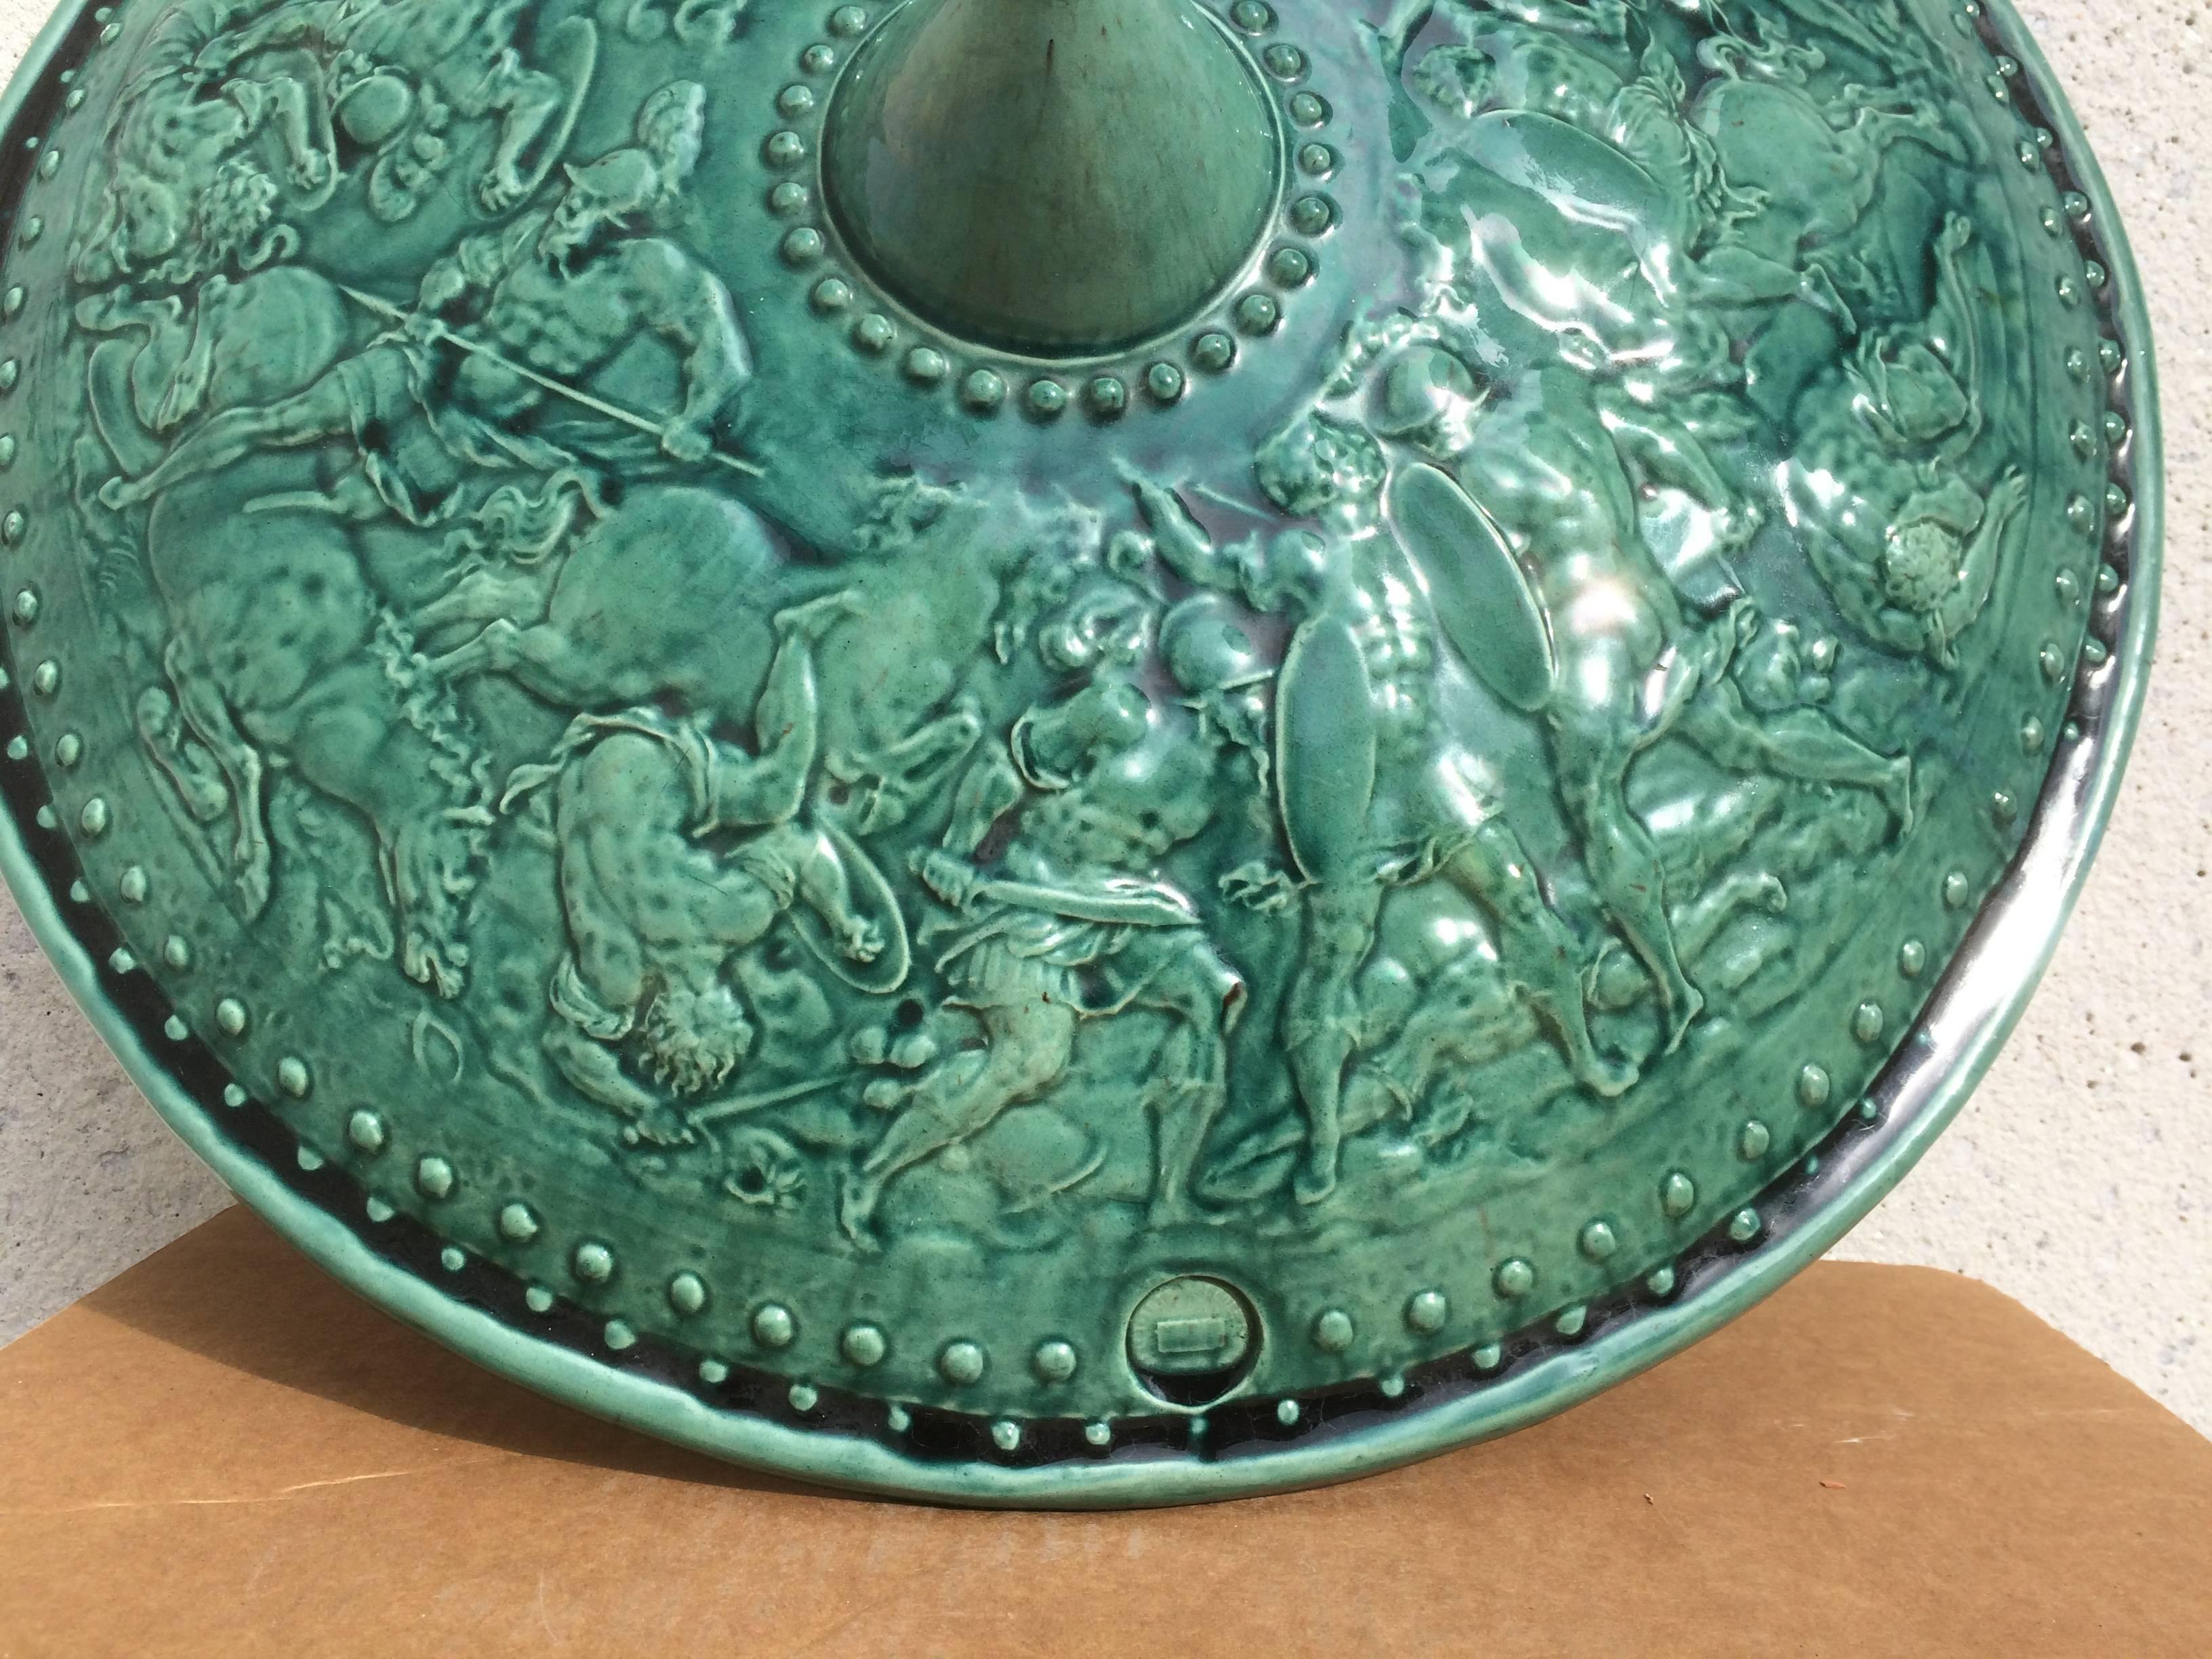 A very fine pair of French majolica ceremonial shields with an unusual turquoise iridescent glaze over incredibly detailed battle scenes. These are most likely copies of a real Renaissance period royal shield. Marked with a stamped lozenge, so far